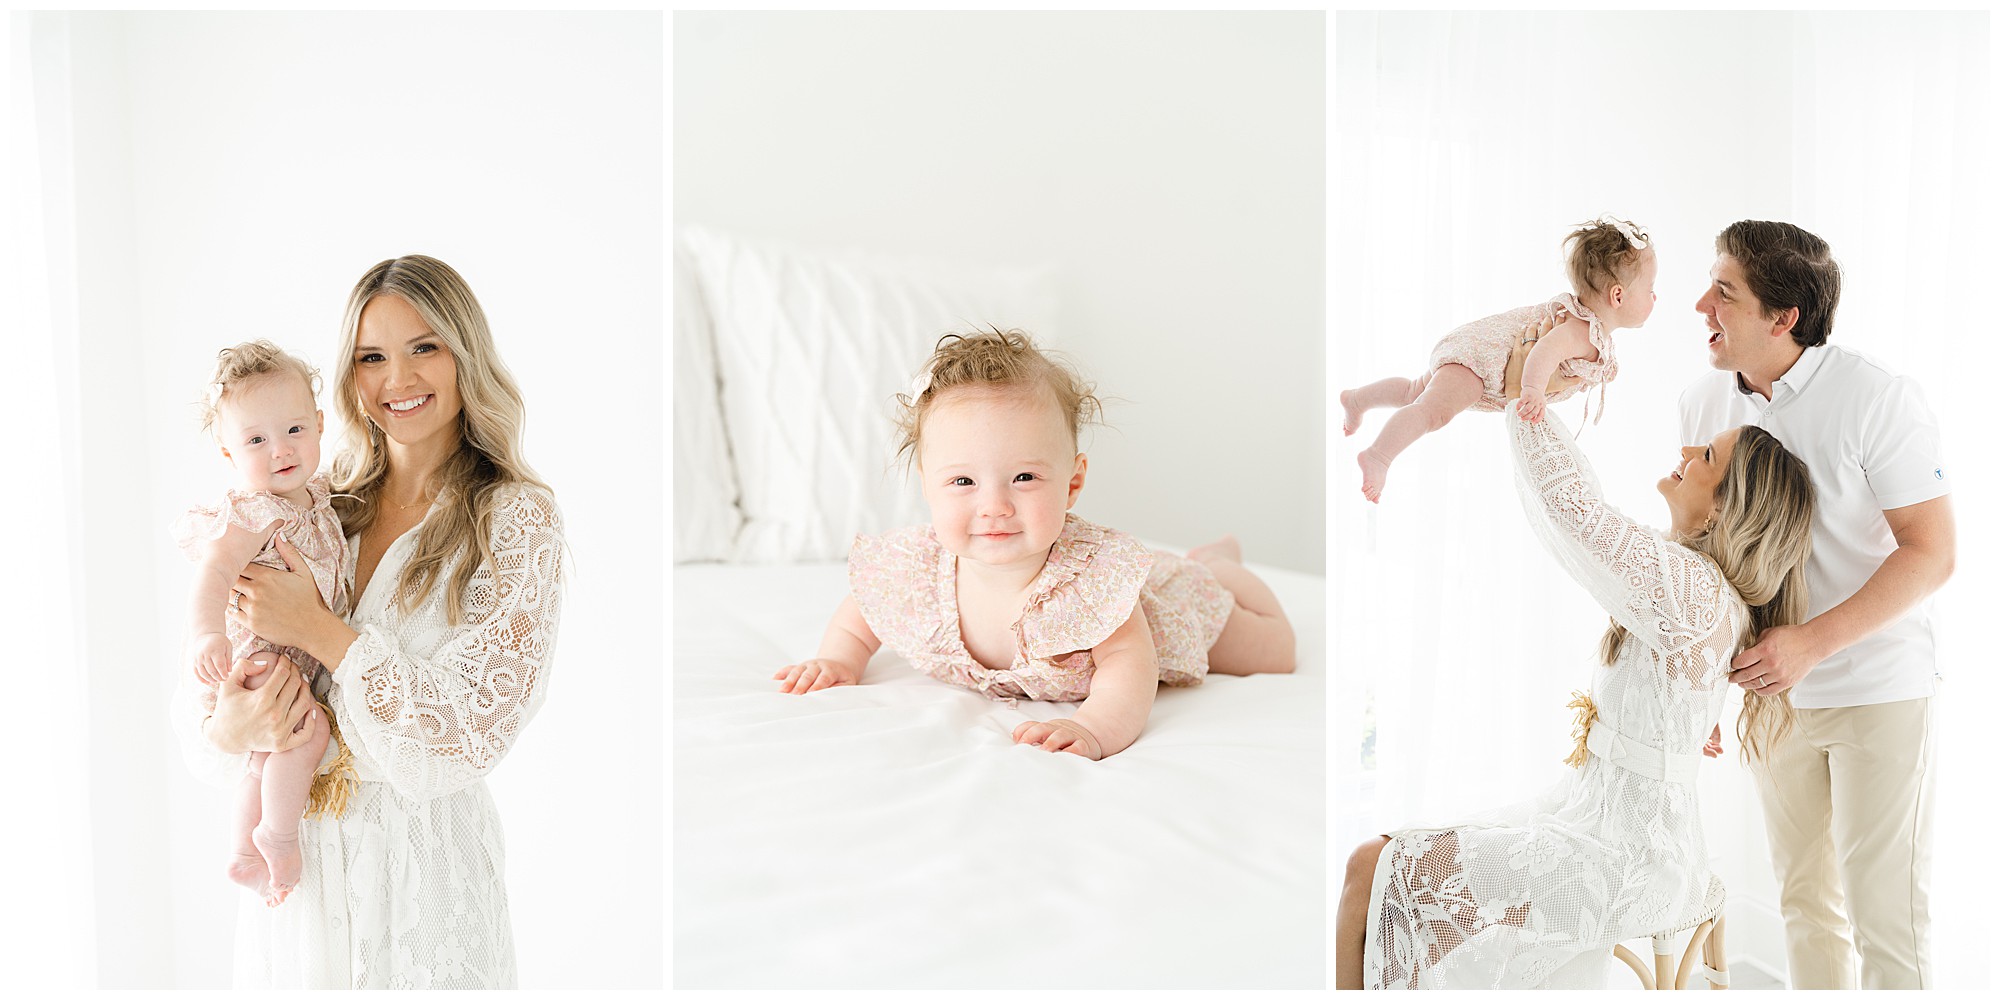 Photos of a six month old baby with her parents posing for portraits in a white studio for an Atlanta baby photographer.